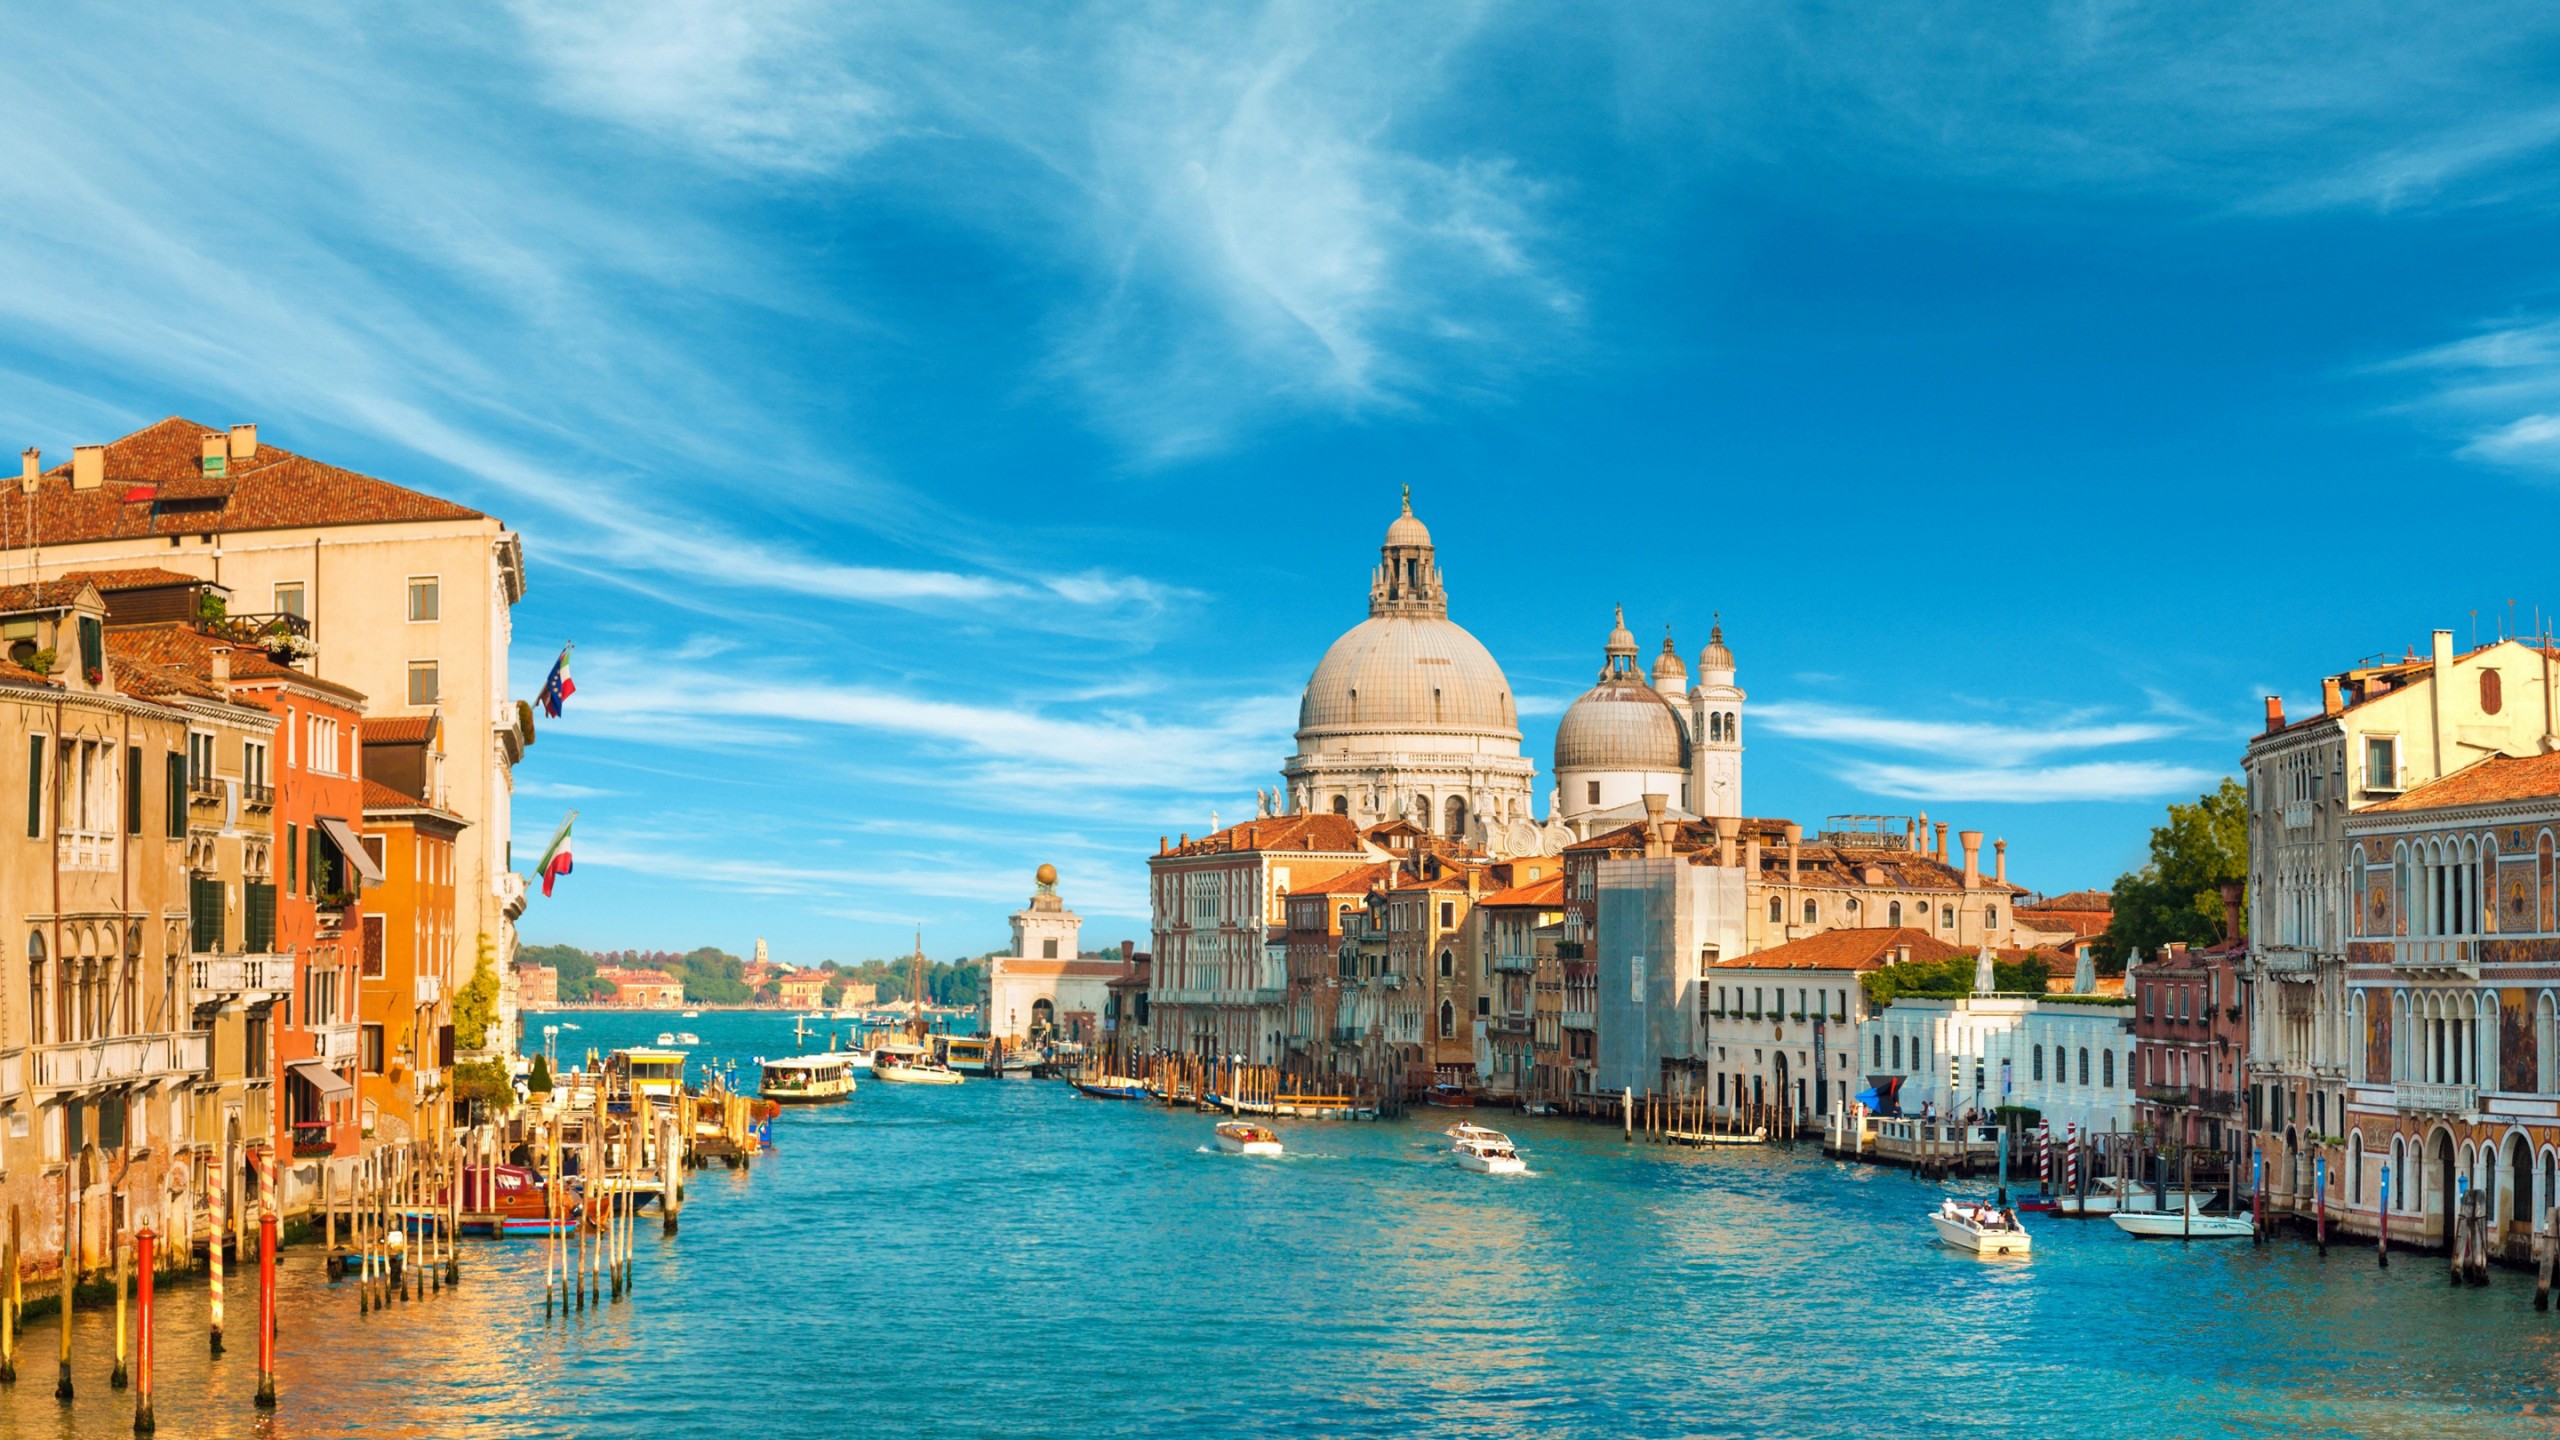 Download Free Venice Wallpaper for Desktop and Mobiles